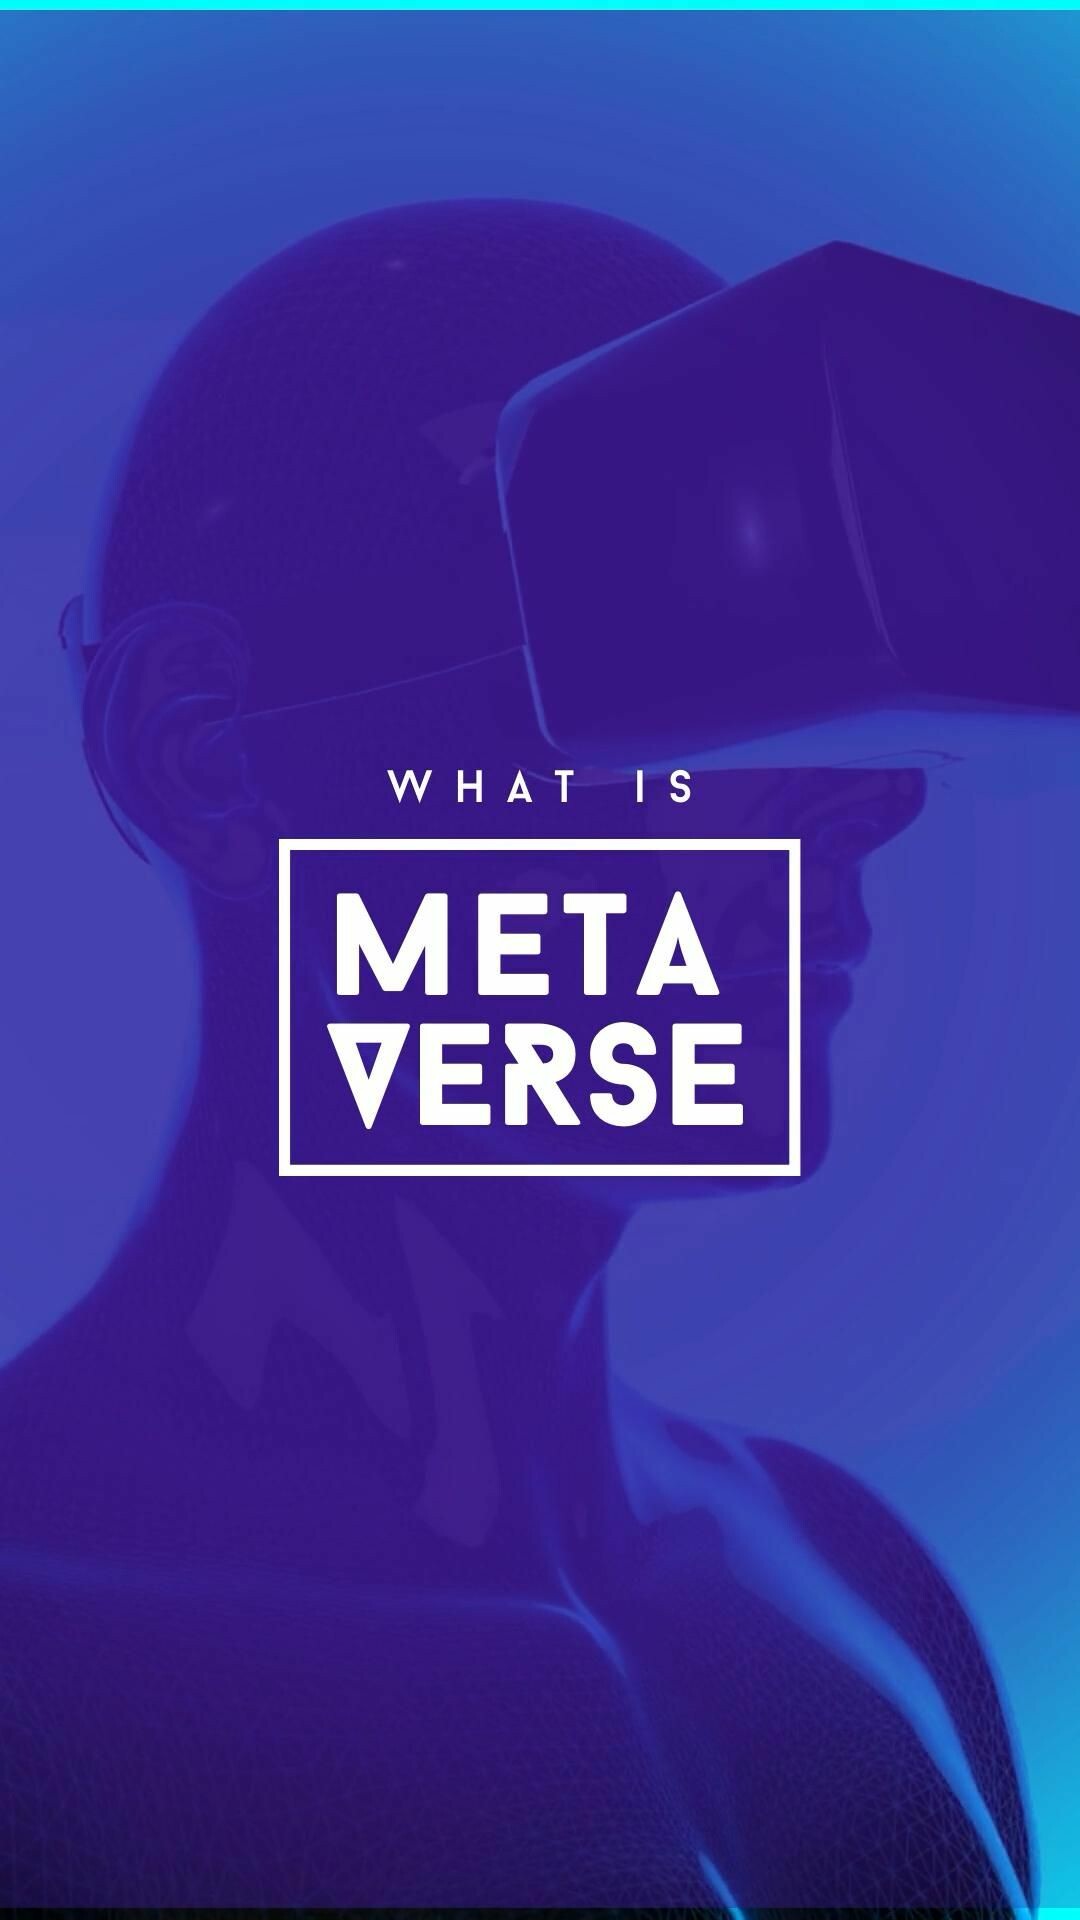 Metaverse 101, 4K wallpapers, Stunning visuals, Mobile wallpaper collection, 1080x1920 Full HD Phone